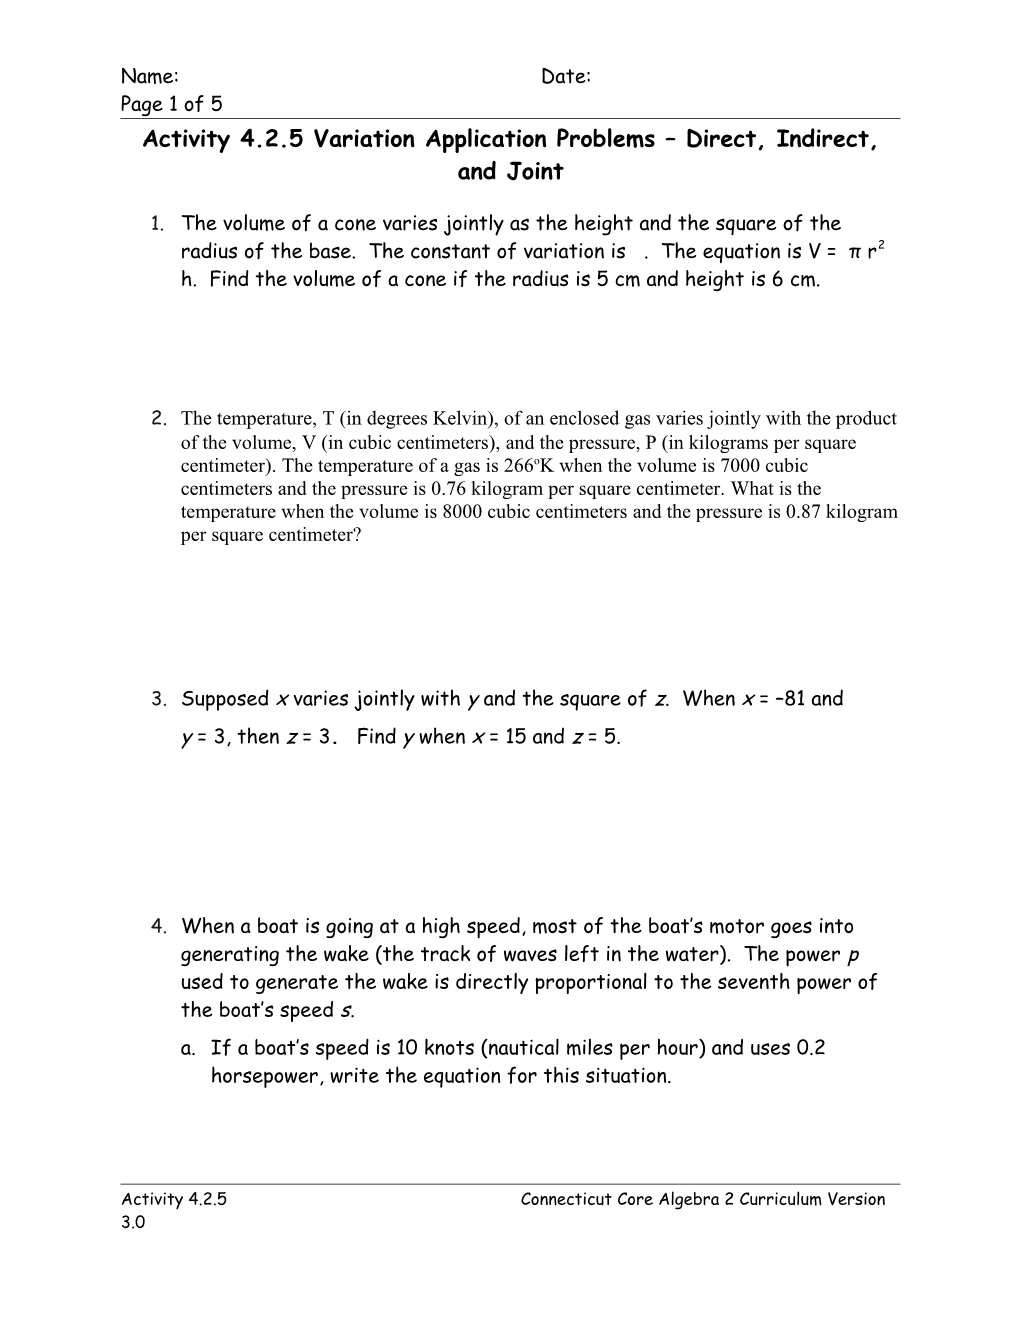 Activity 4.2.5 Variation Application Problems Direct, Indirect, and Joint